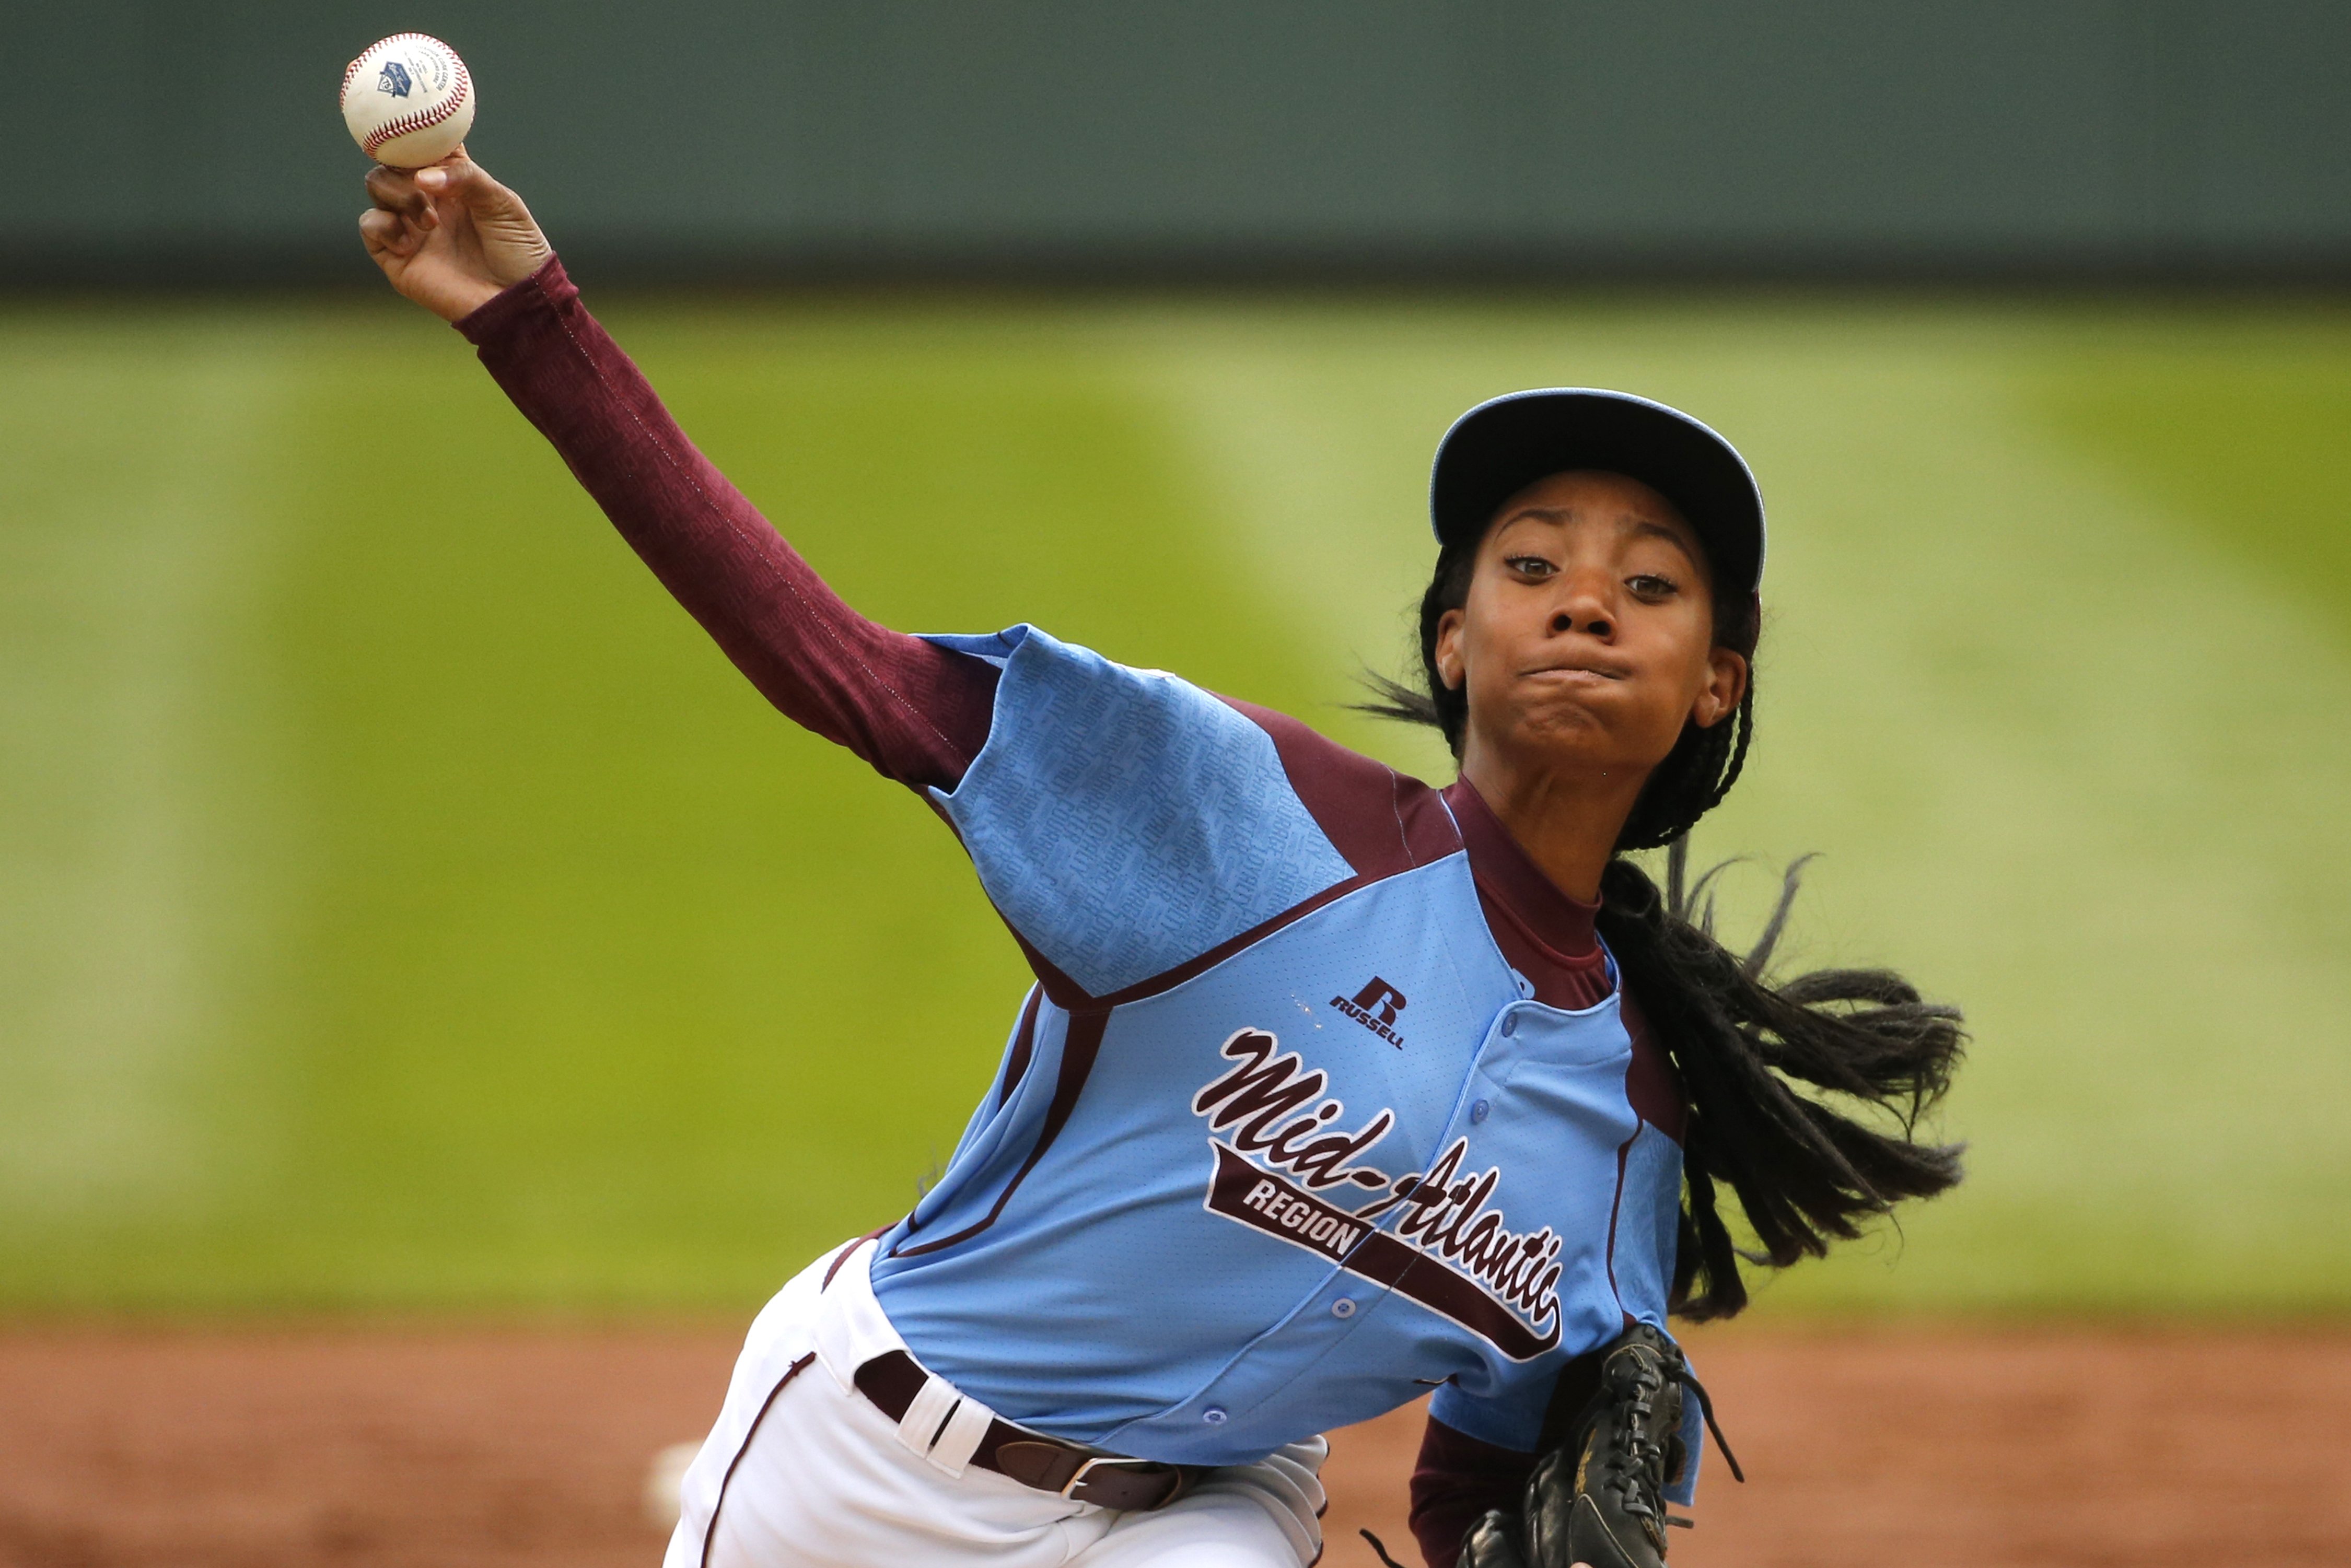 Mo'ne Davis delivers in the first inning against Nashville, Tenn. during a baseball game in United States pool play at the Little League World Series tournament in South Williamsport, Pa., Aug. 15, 2014.